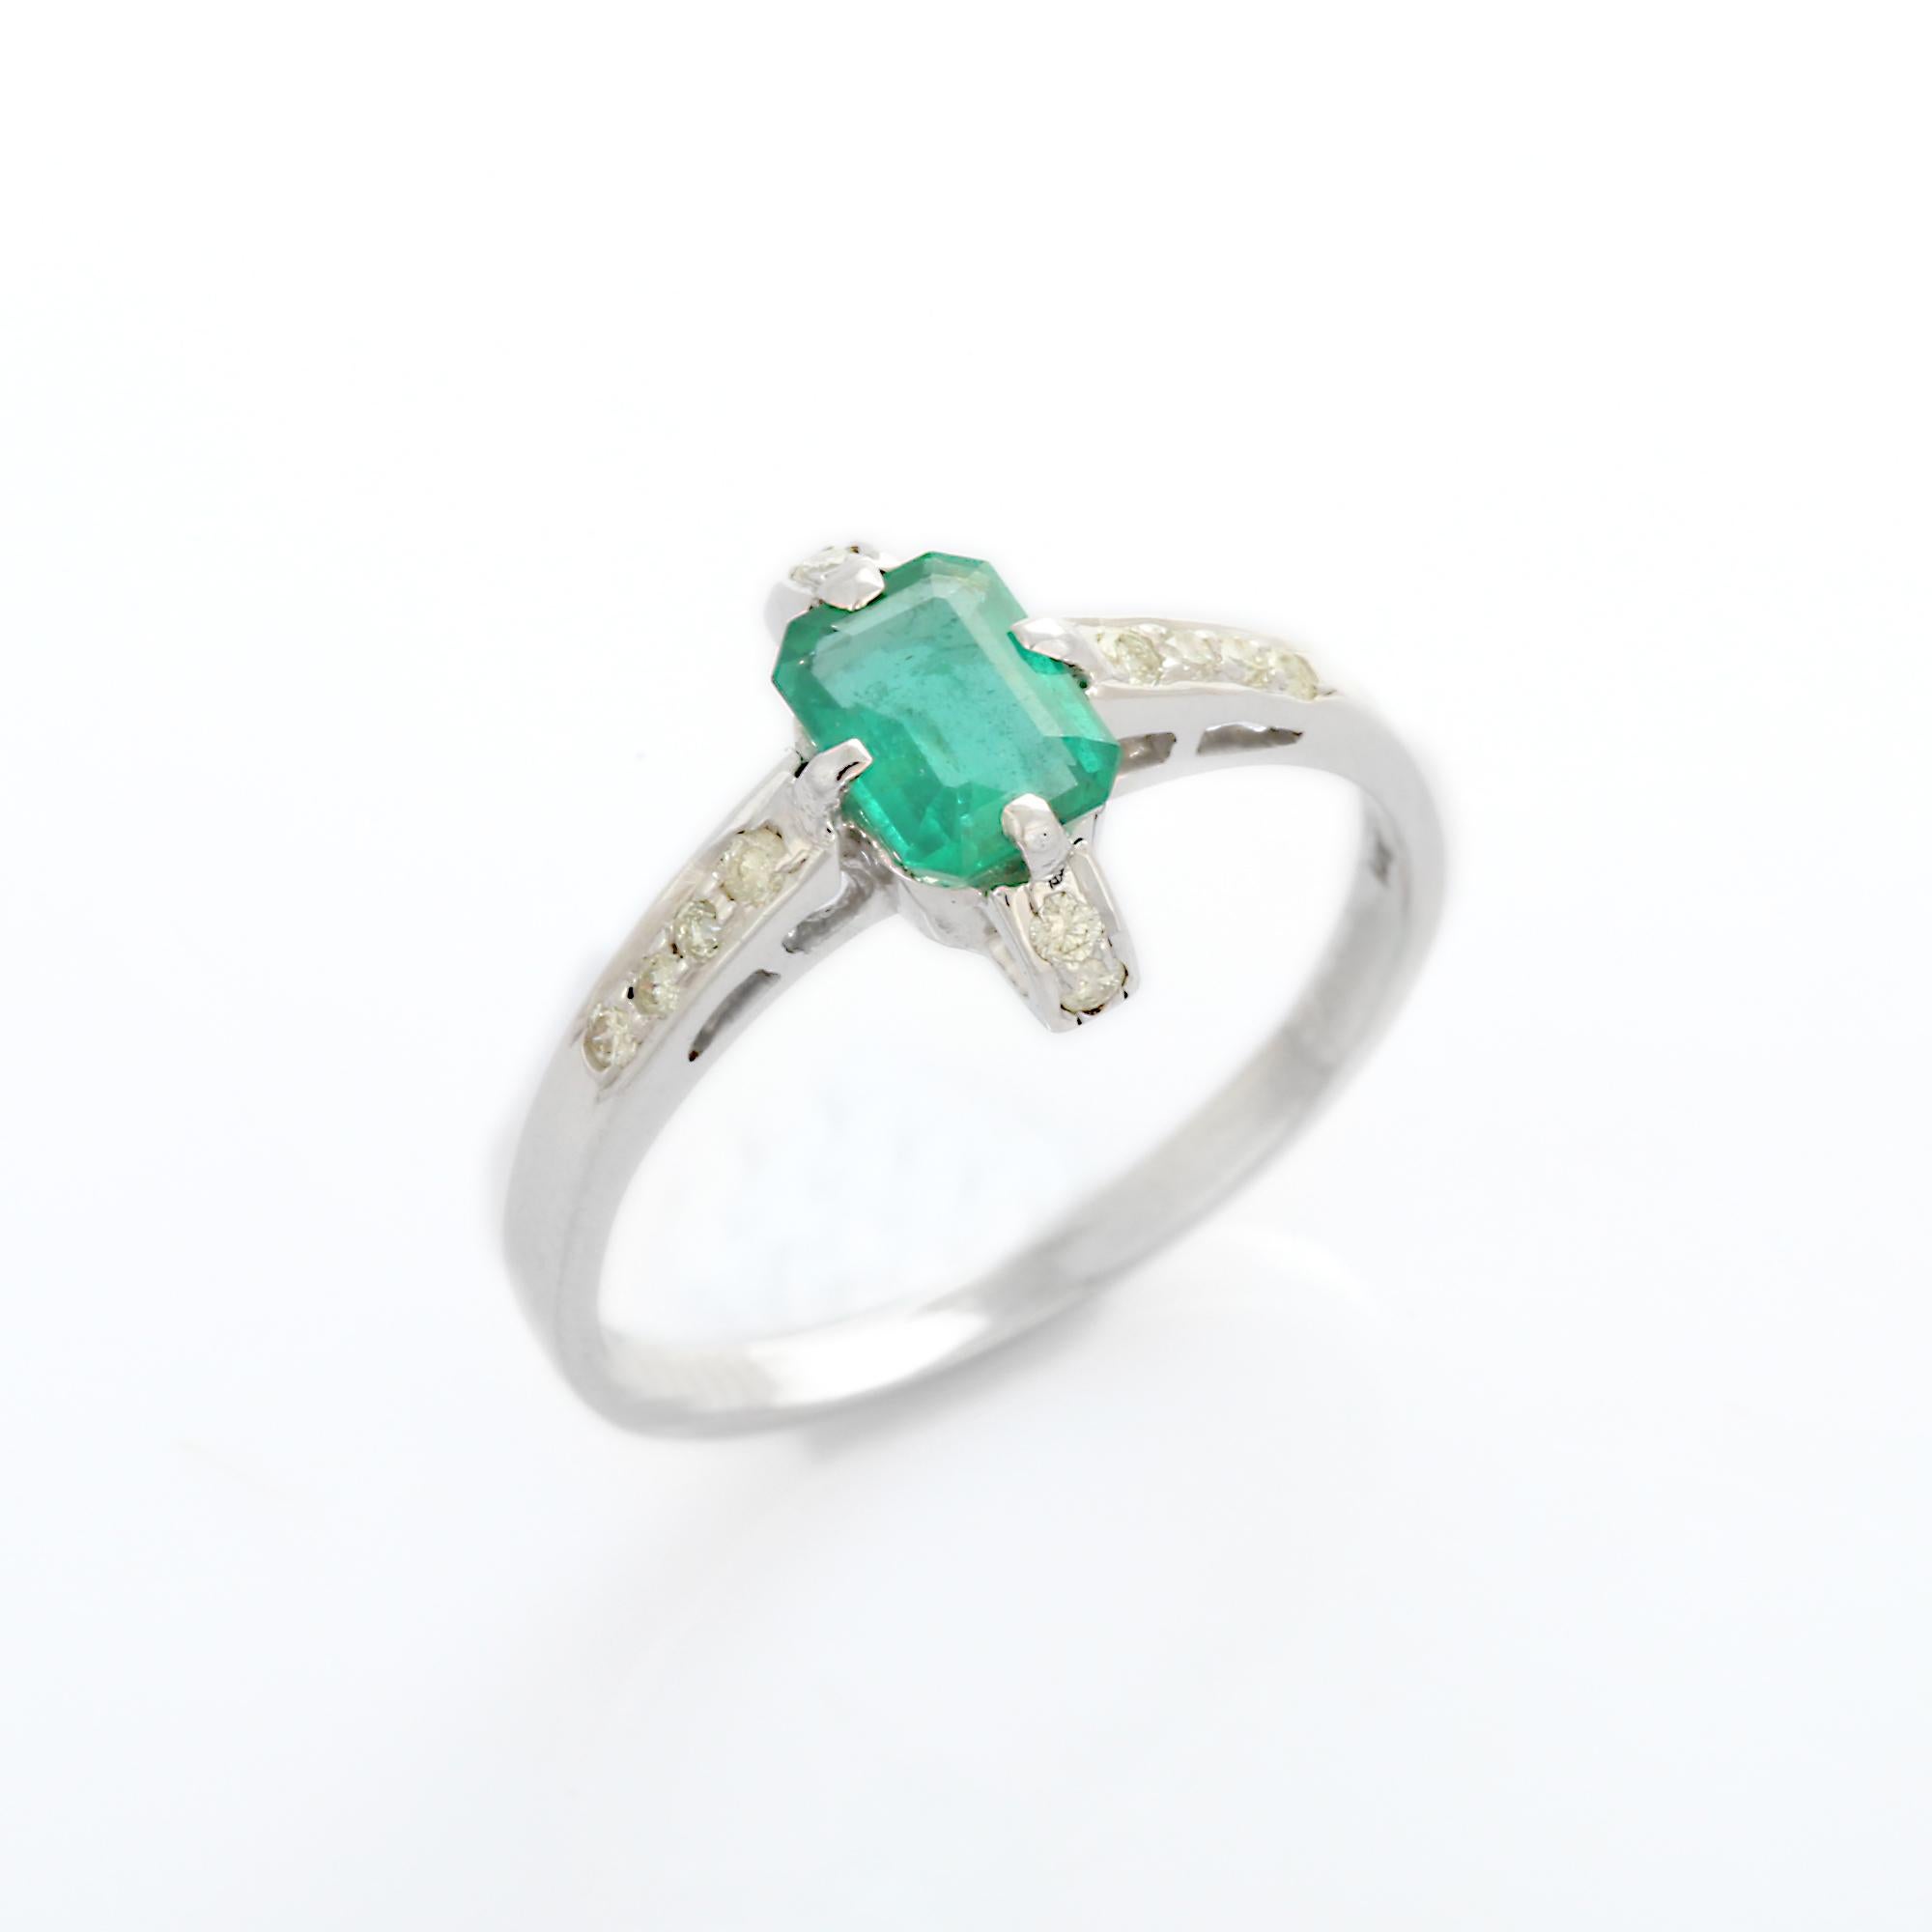 For Sale:  14K White Gold Emerald Ring with Diamonds  9